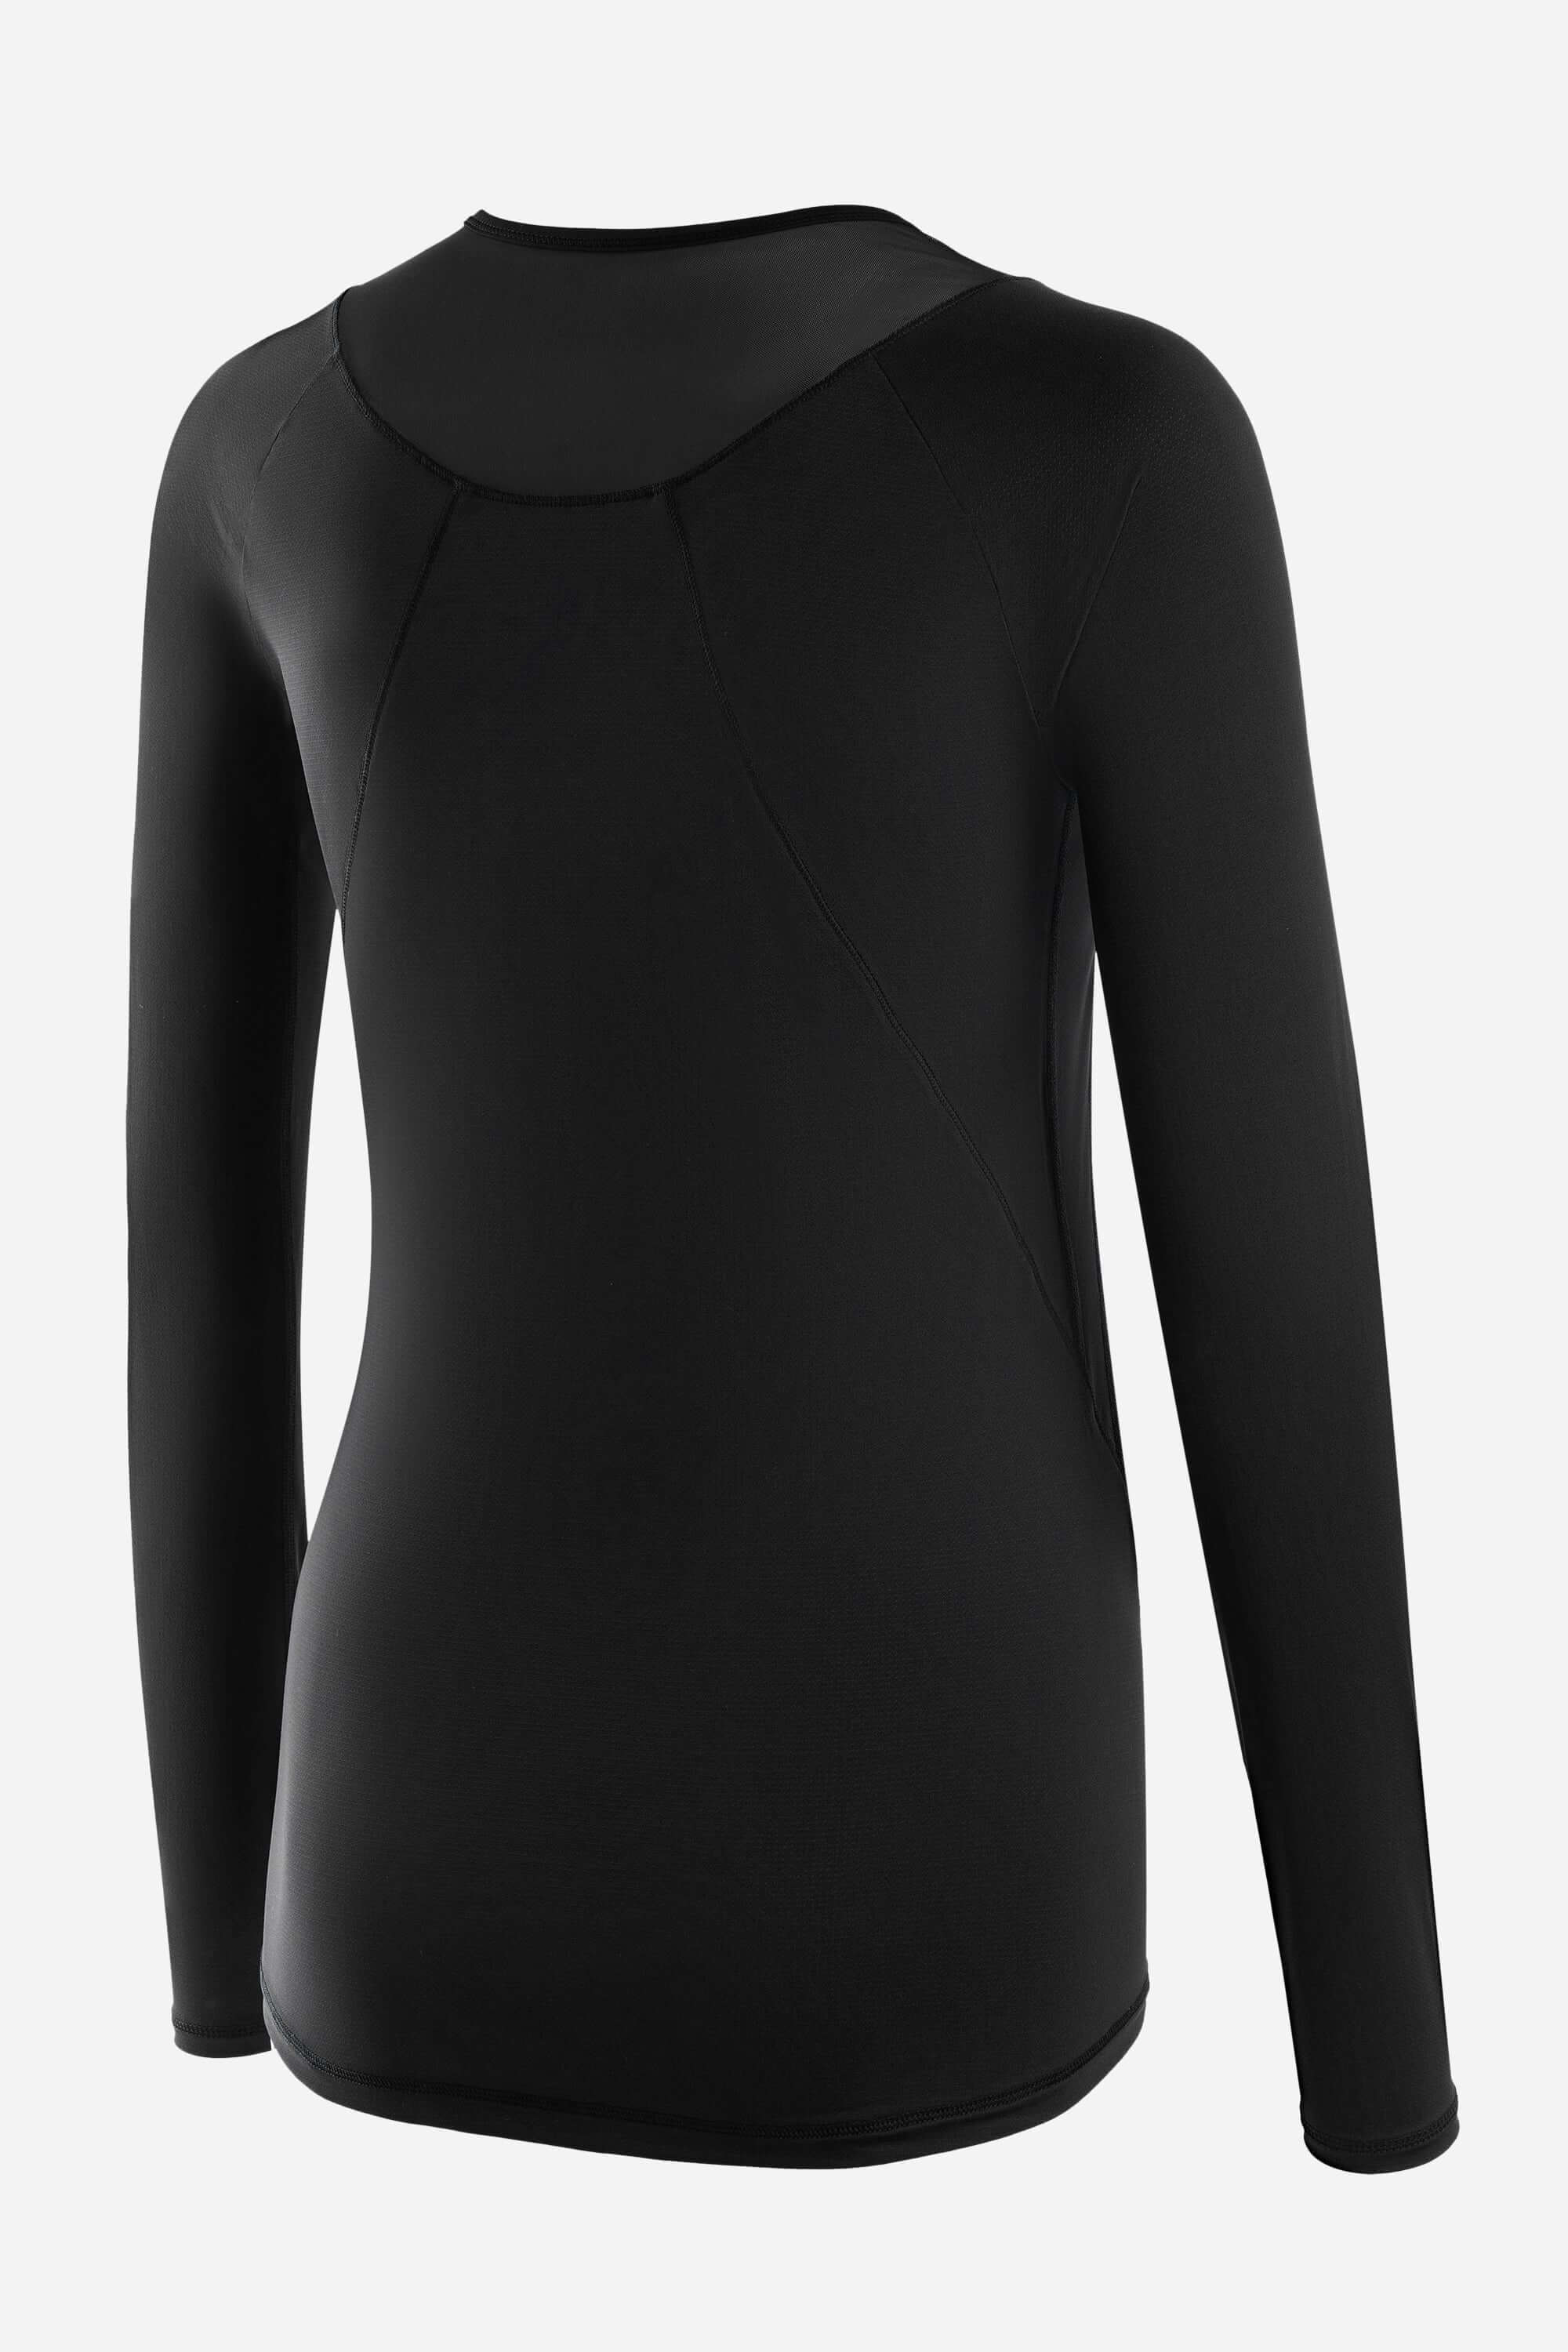 Women in a black long sleeve workout t-shirt with black short tights